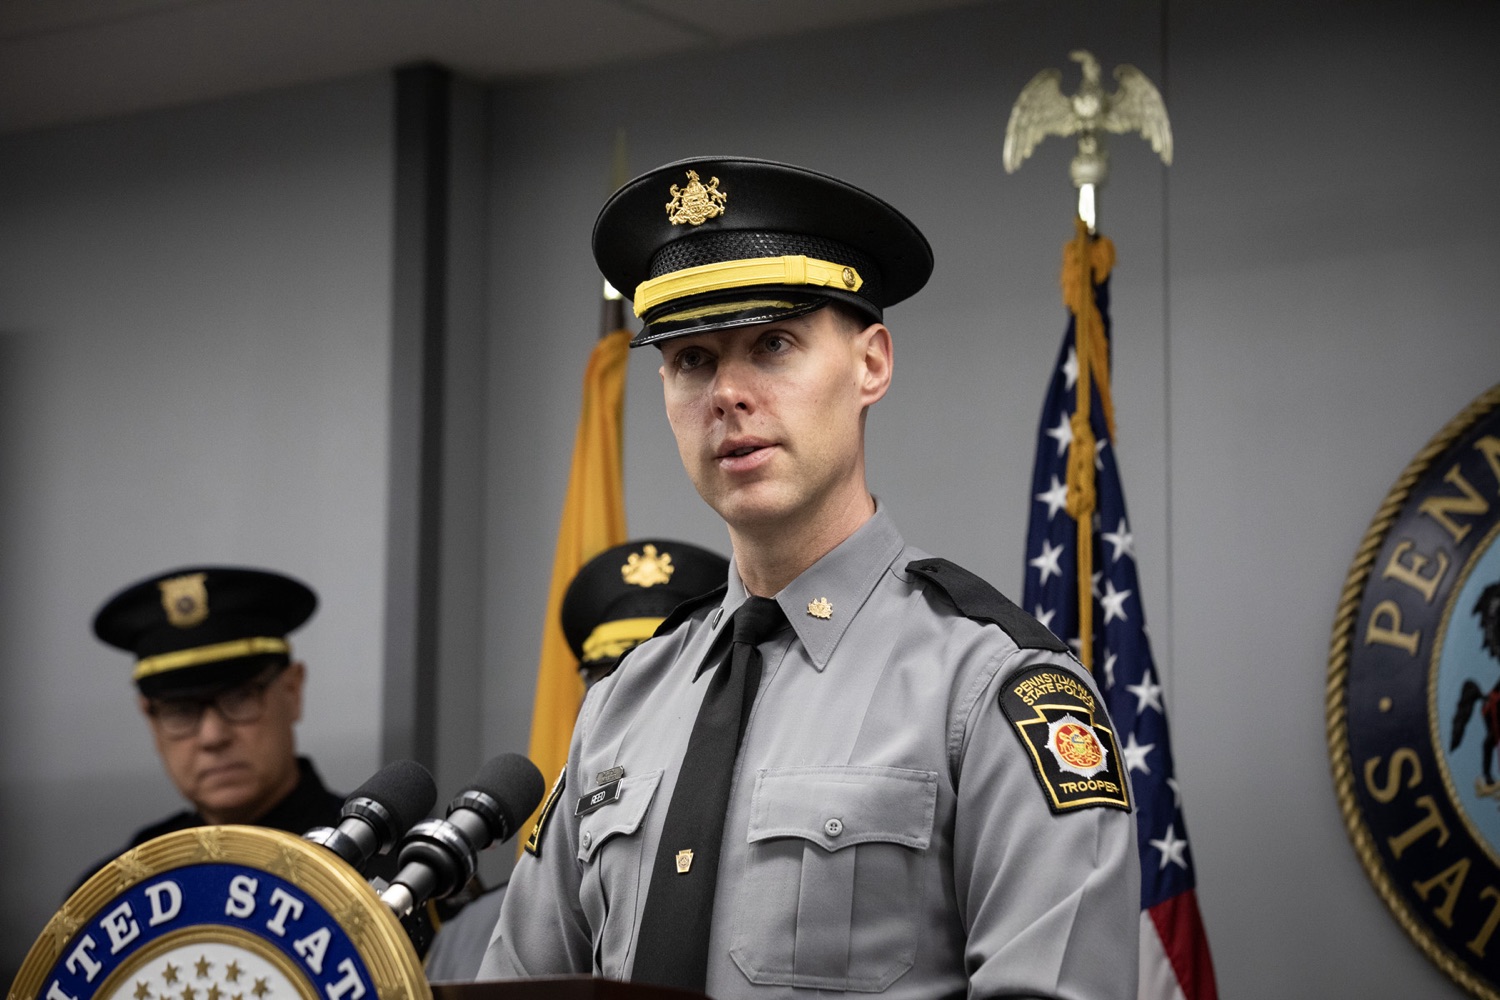 Senator Bob Casey visited Pennsylvania State Police Headquarters to discuss his proposed Stop Fentanyl at the Border Act. Pictured here is Lt. Adam Reed delivering remarks during the event. Harrisburg, Pennsylvania.<br><a href="https://filesource.amperwave.net/commonwealthofpa/photo/24347_psp_stopFentanyl_JP_03.jpg" target="_blank">⇣ Download Photo</a>